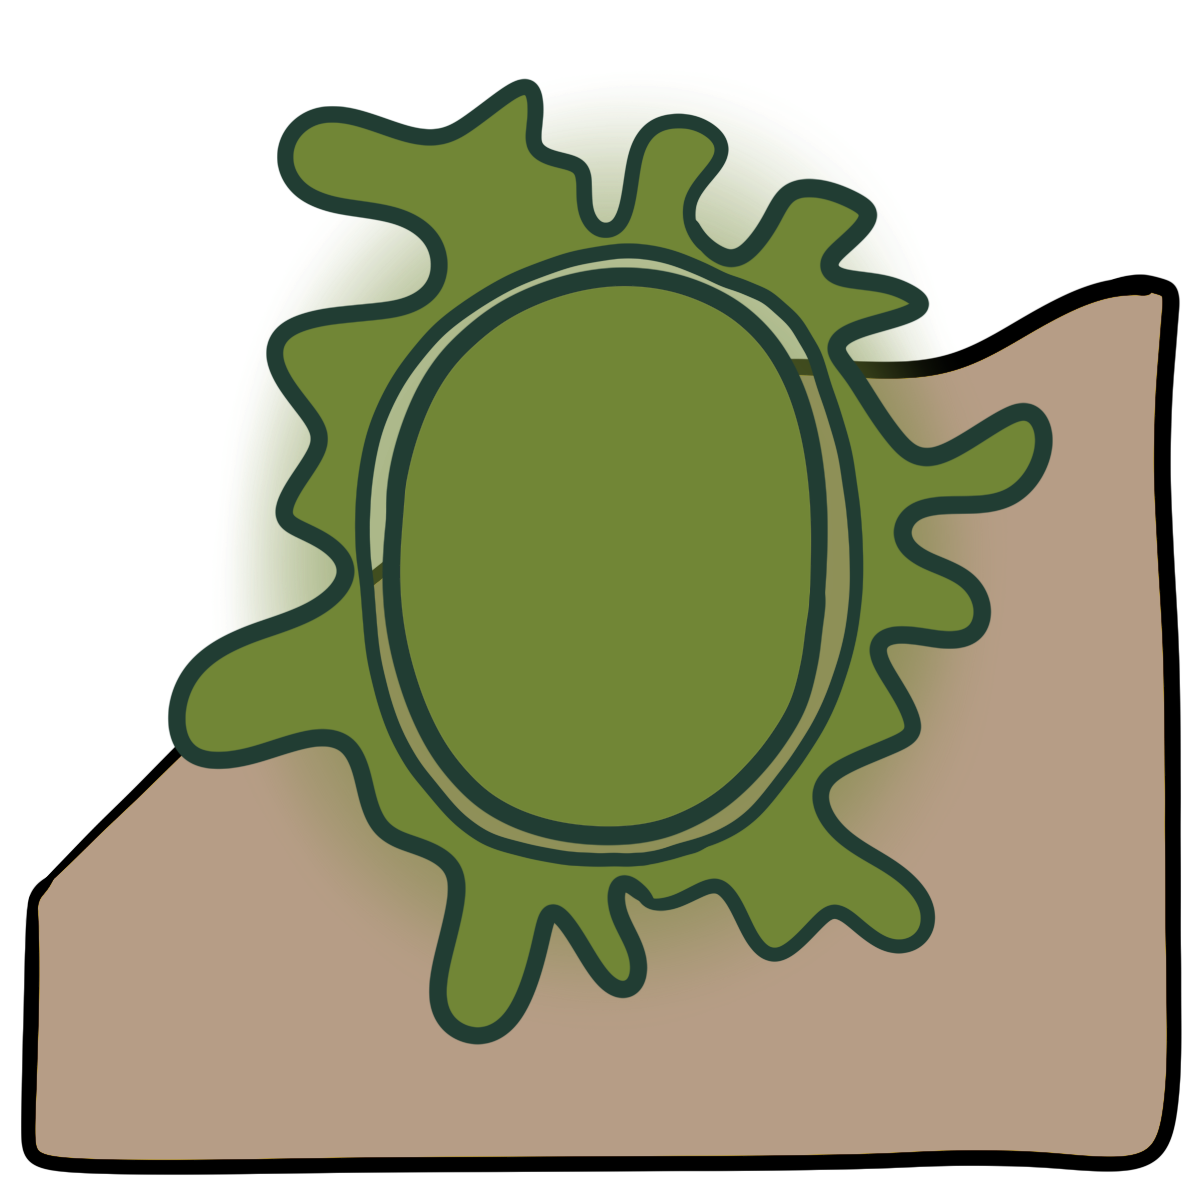 A yellowy green oval with a splatting blob shape encircling it. Curved beige skin fills the bottom half of the background.